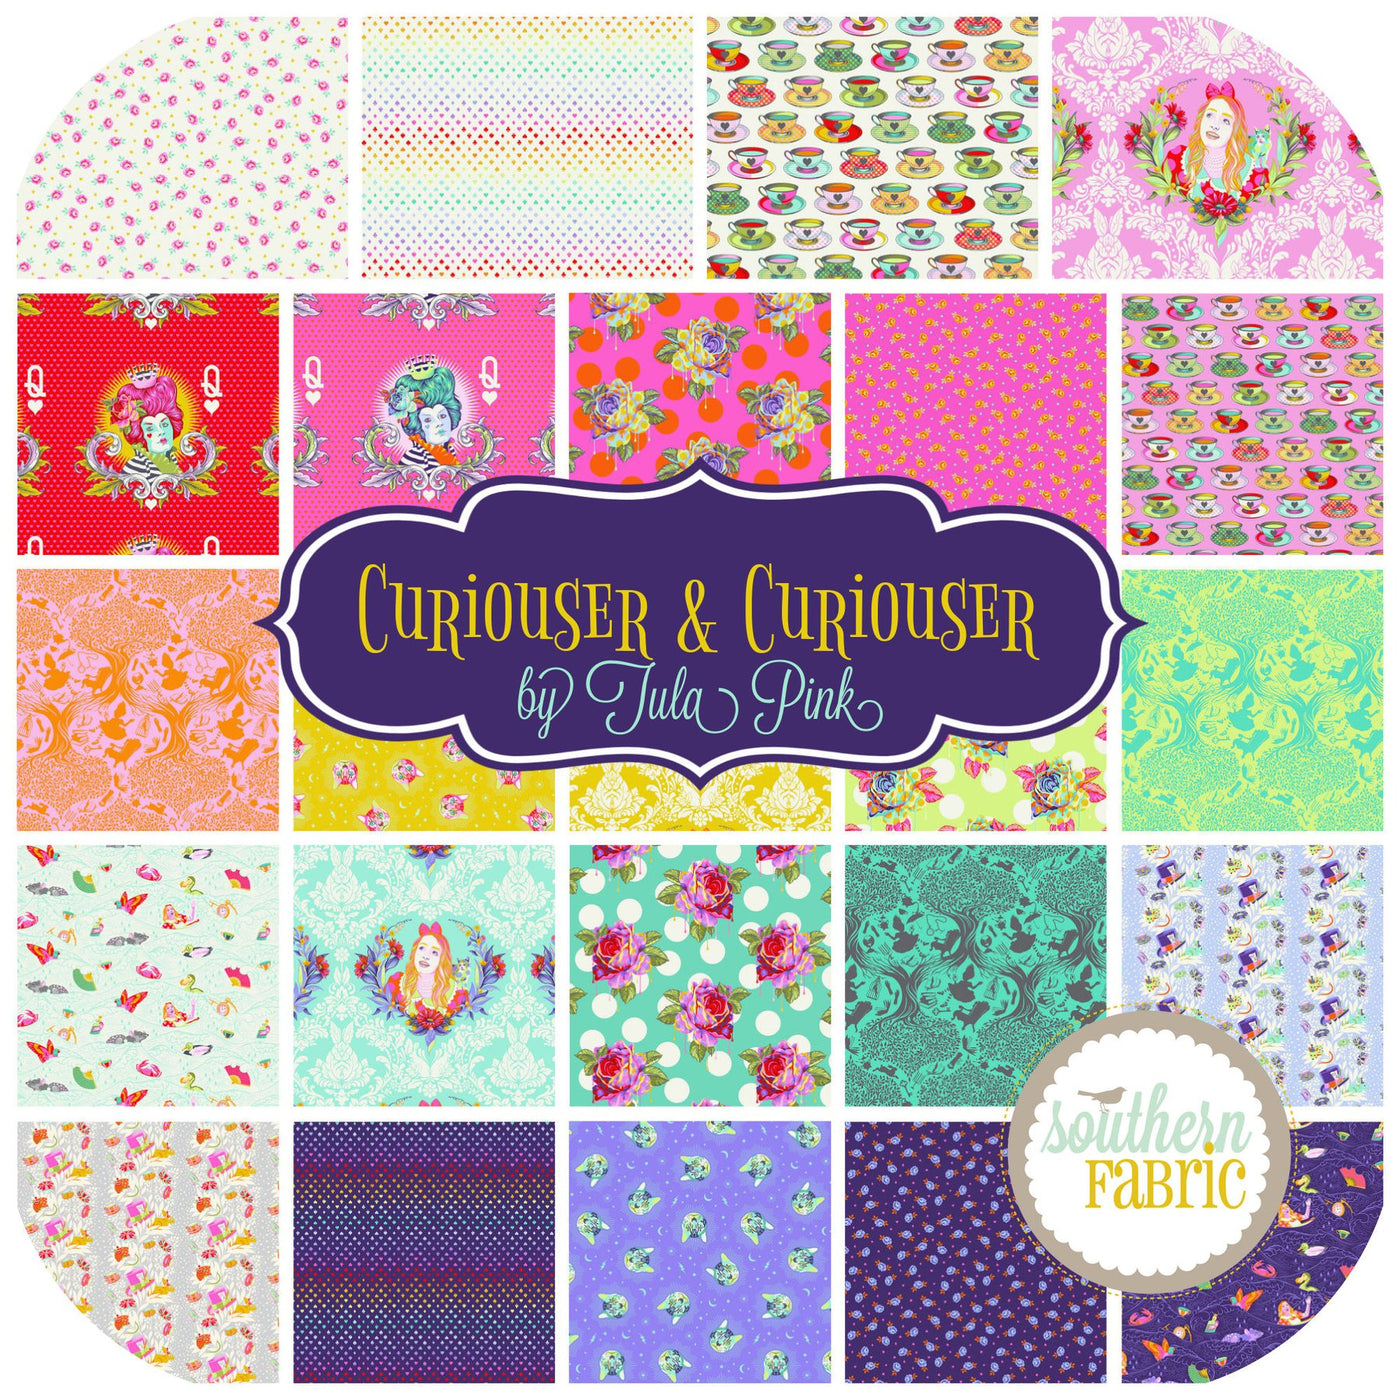 Curiouser and Curiouser Fat Quarter Bundle (25 pcs) by Tula Pink for 485Spirit SF